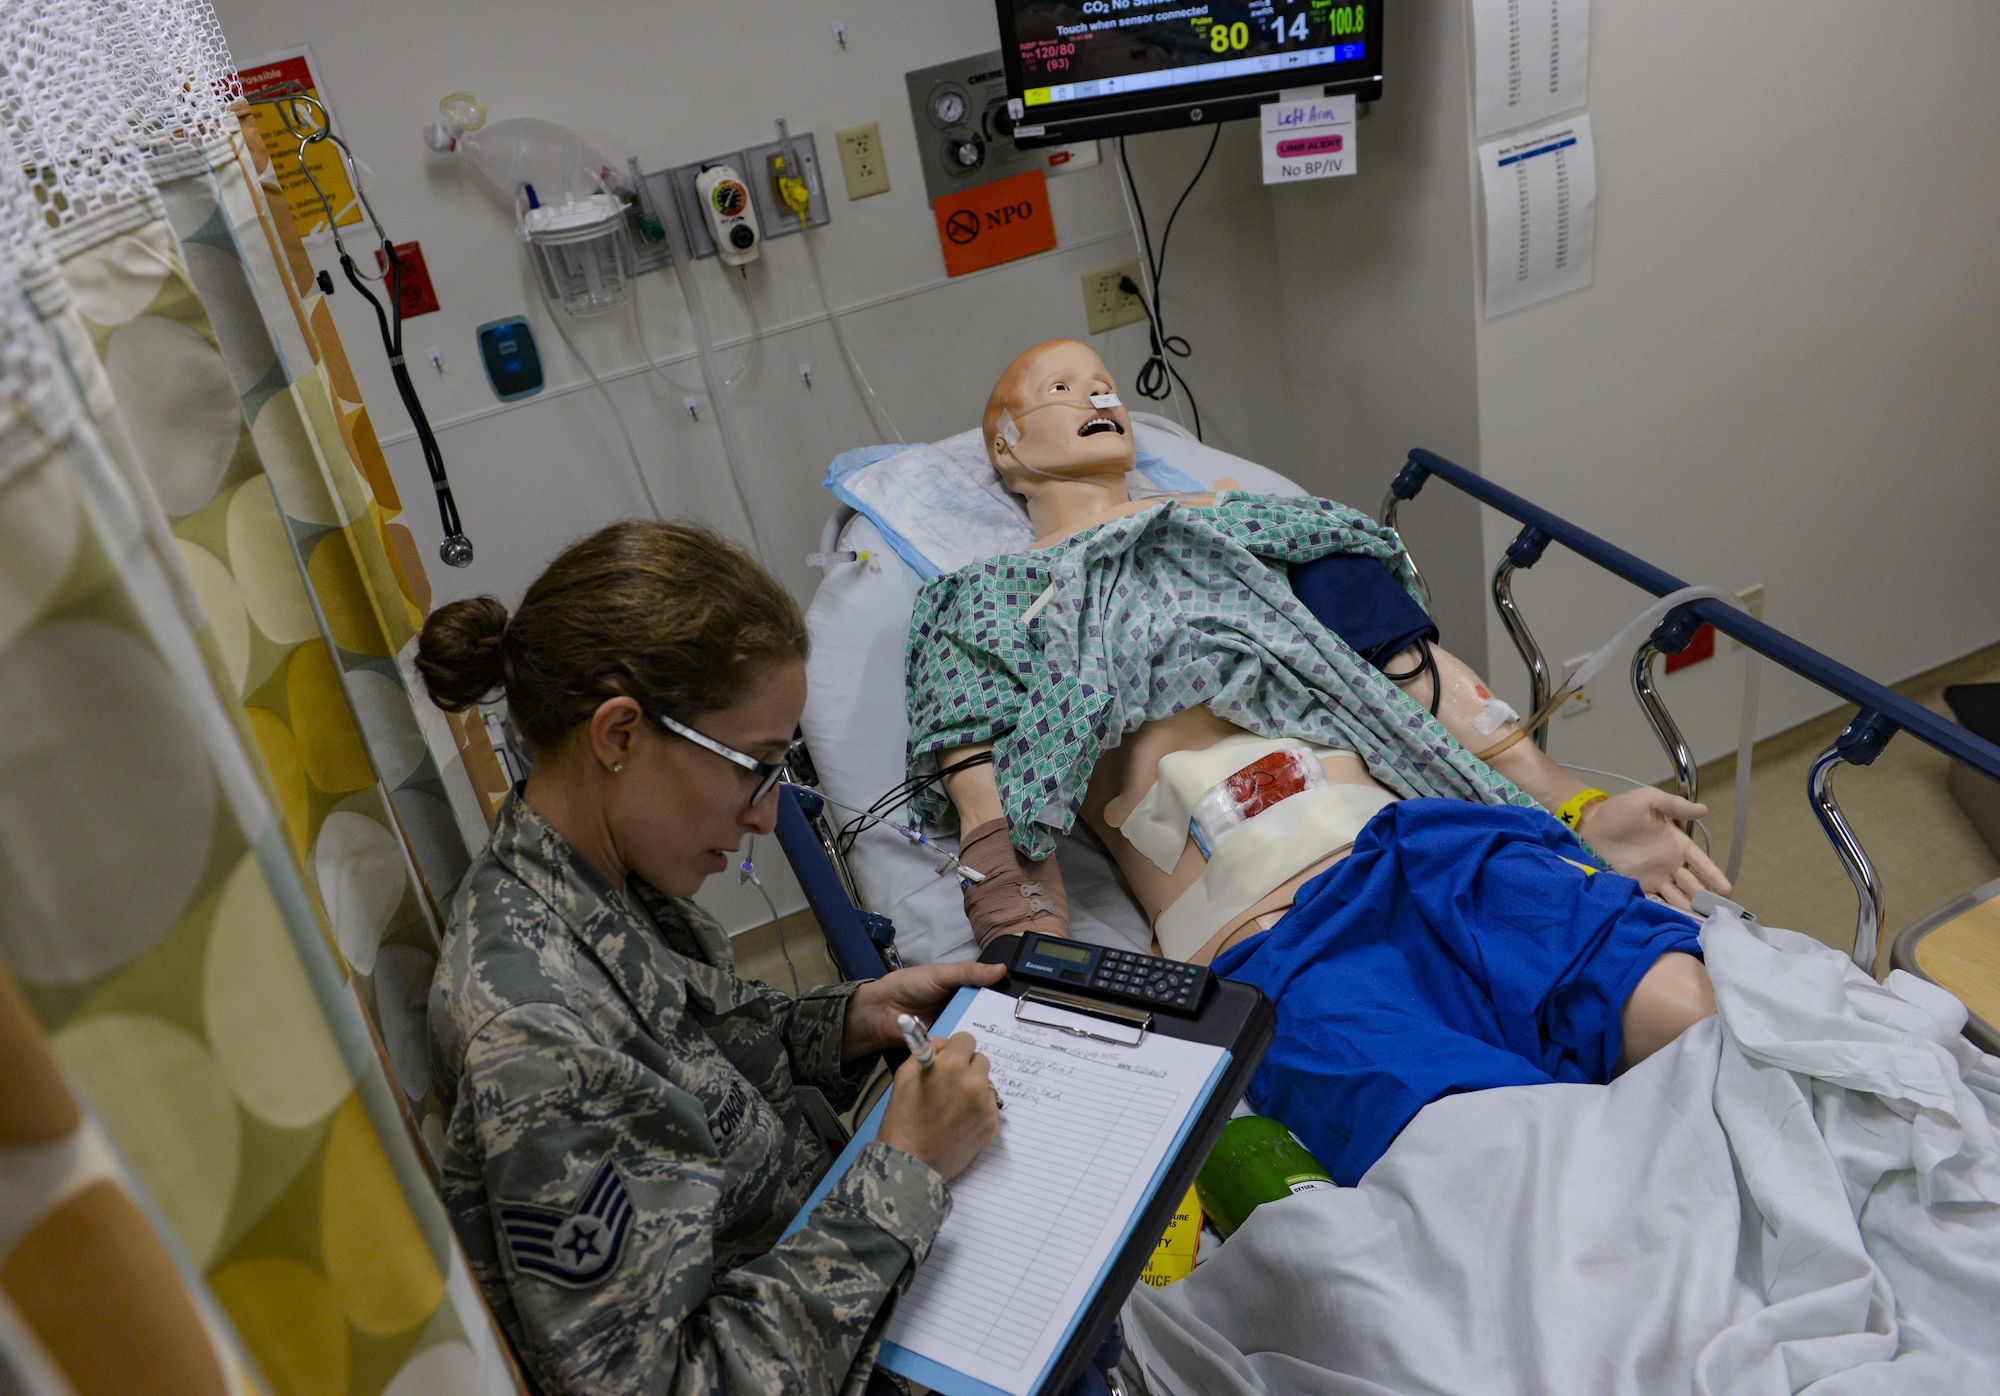 Staff Sgt. Jacquelyn Longar, 99th Medical Group aerospace medical technician, participates in the patient safety room of horrors event in the Mike O’Callaghan Medical Center at Nellis Air Force Base, Nev., May 10, 2017. The participants of the event had to identify as many safety violations as they could in five minutes. (U.S. Air Force photo by Airman 1st Class Nathan Byrnes/Released)